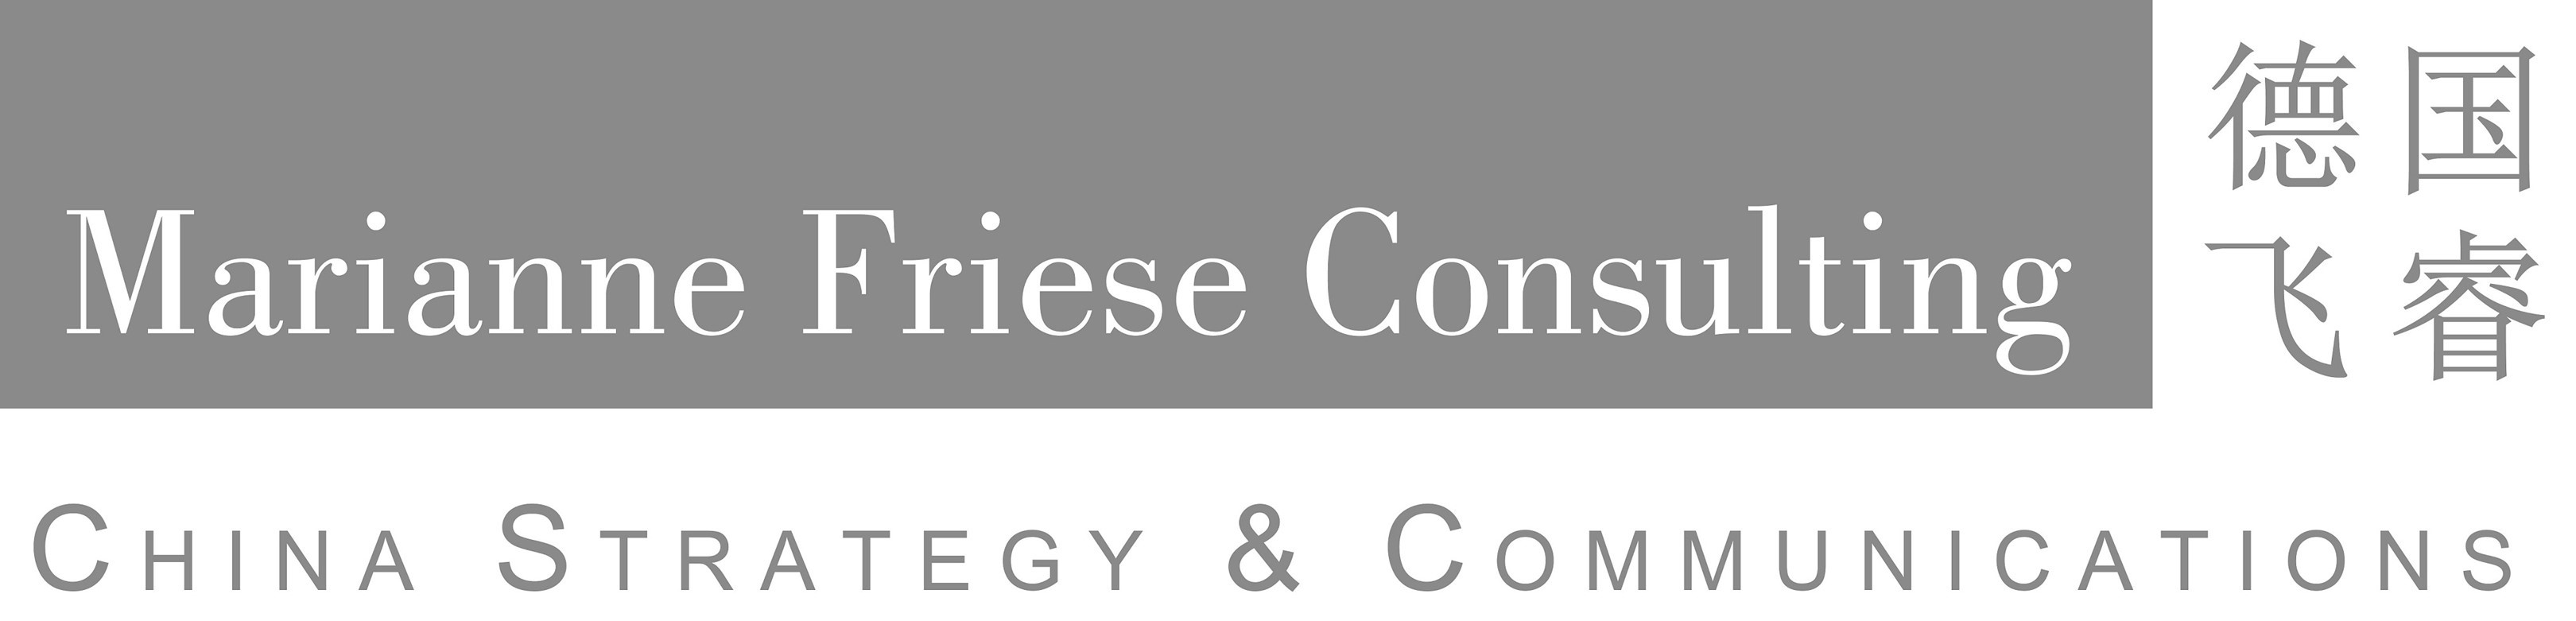 Marianne Friese Consulting